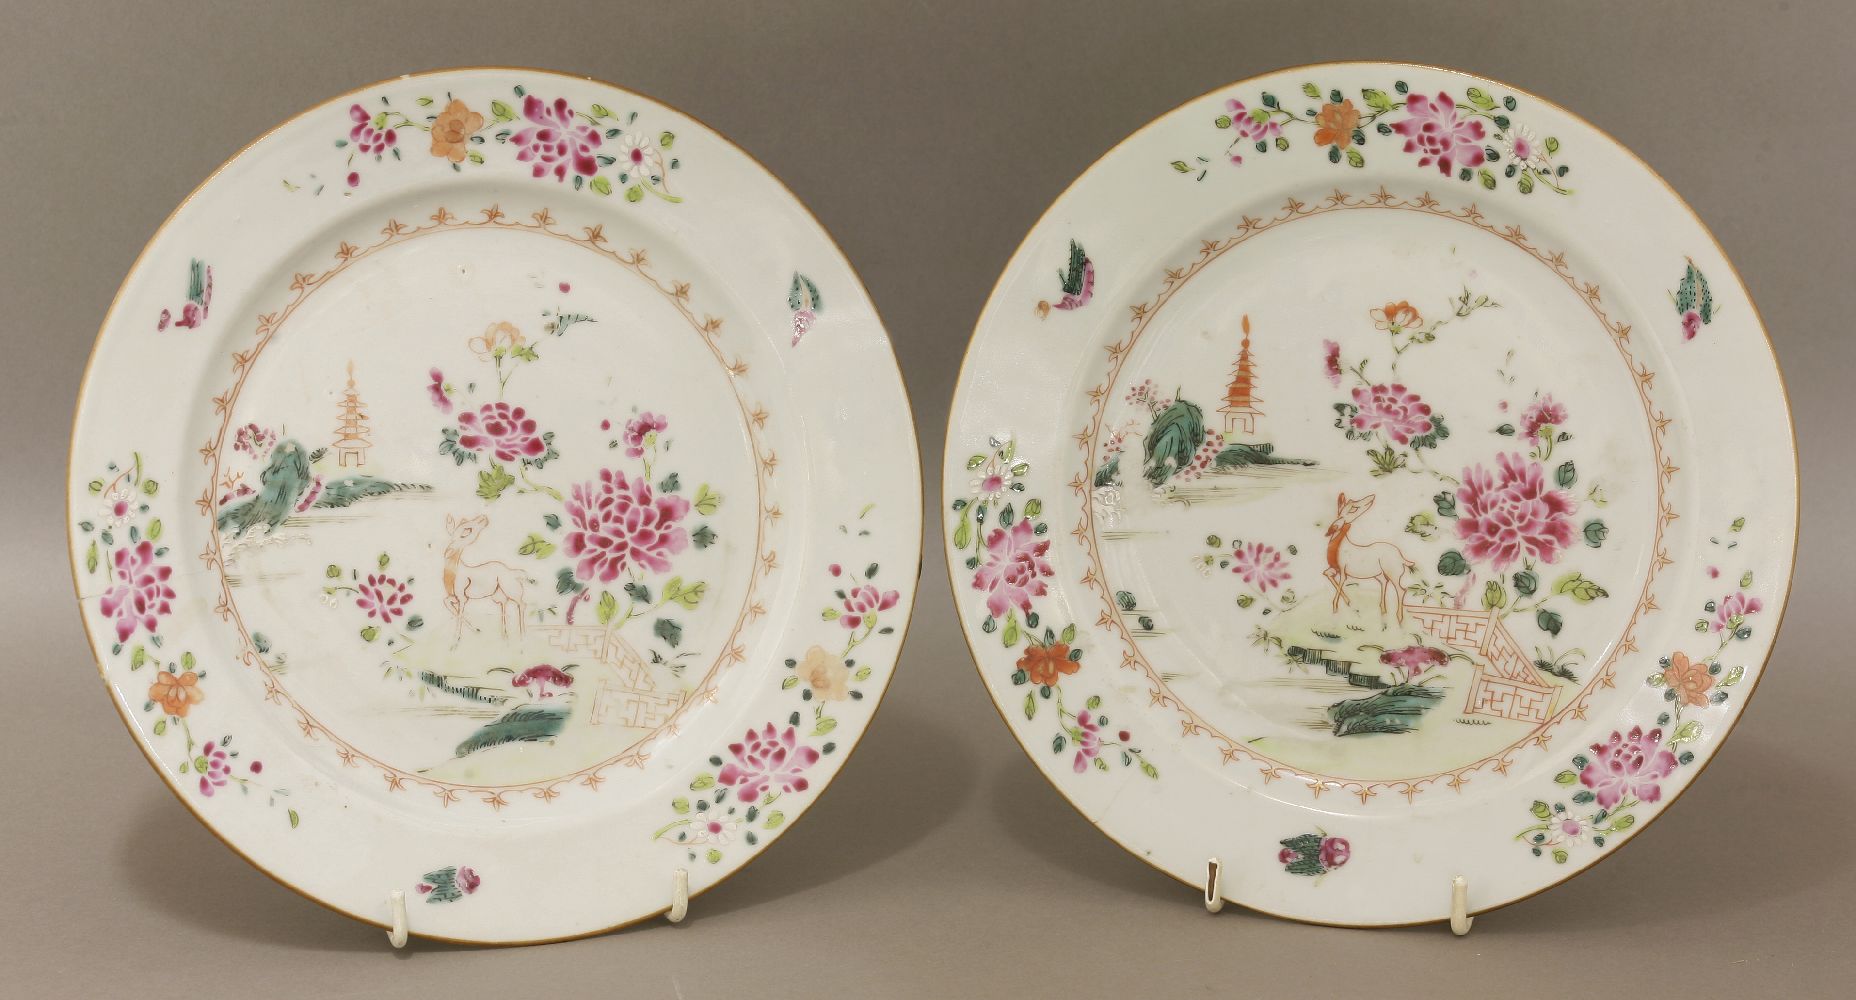 Five various porcelain famille rose Plates,18th century, four with floral design and one with houses - Image 2 of 3